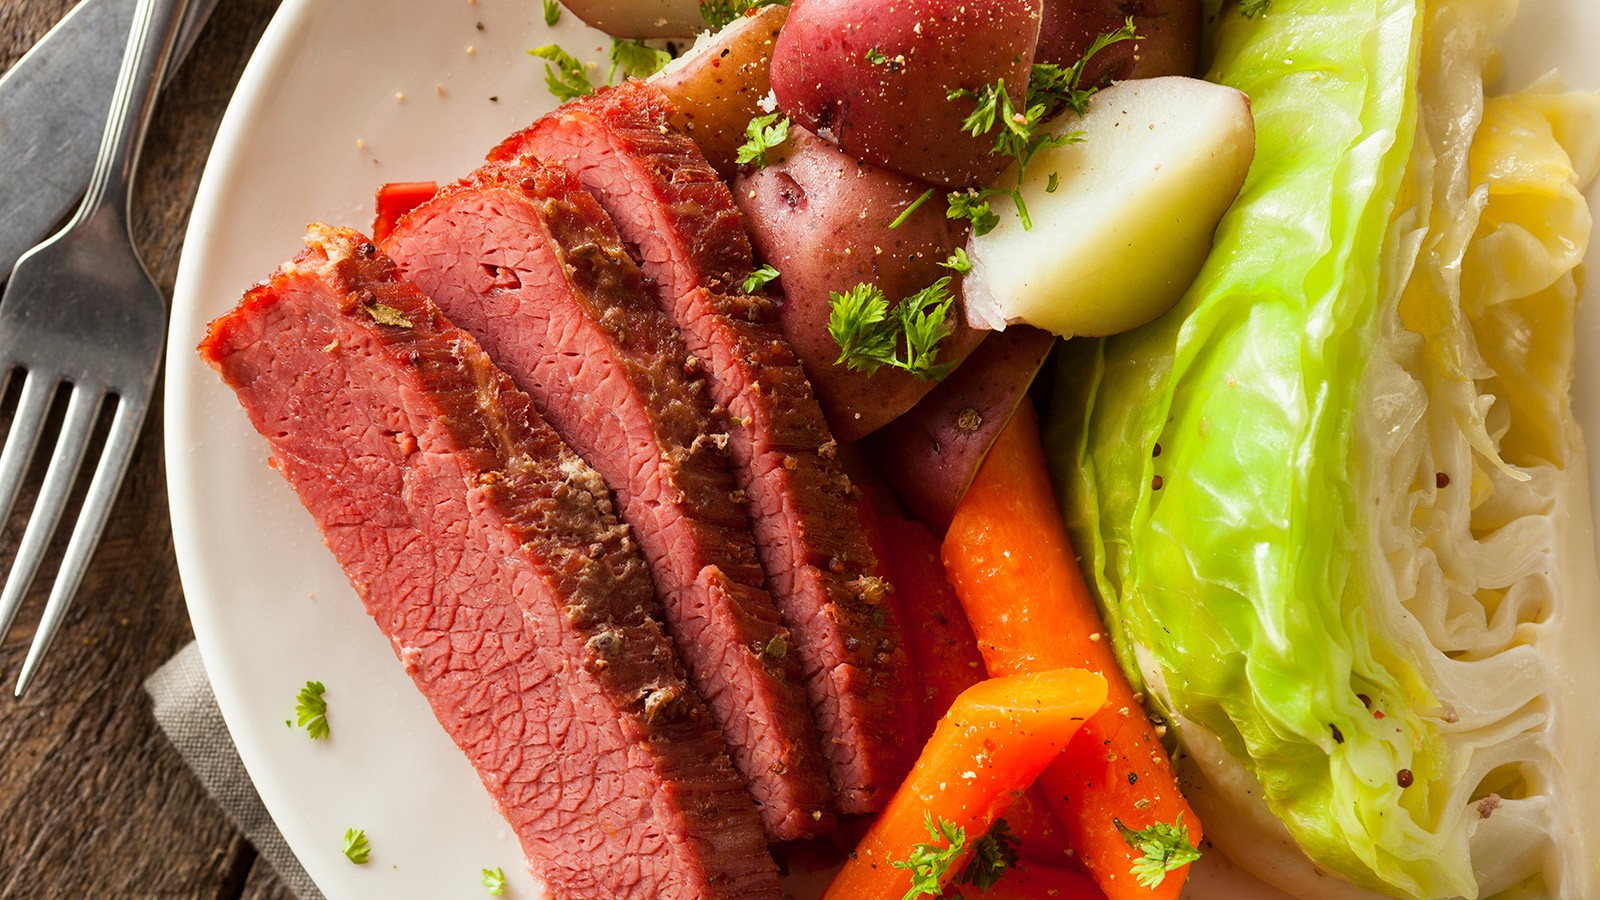 ask-an-expert-corned-beef-and-cabbage-not-just-for-march-meals